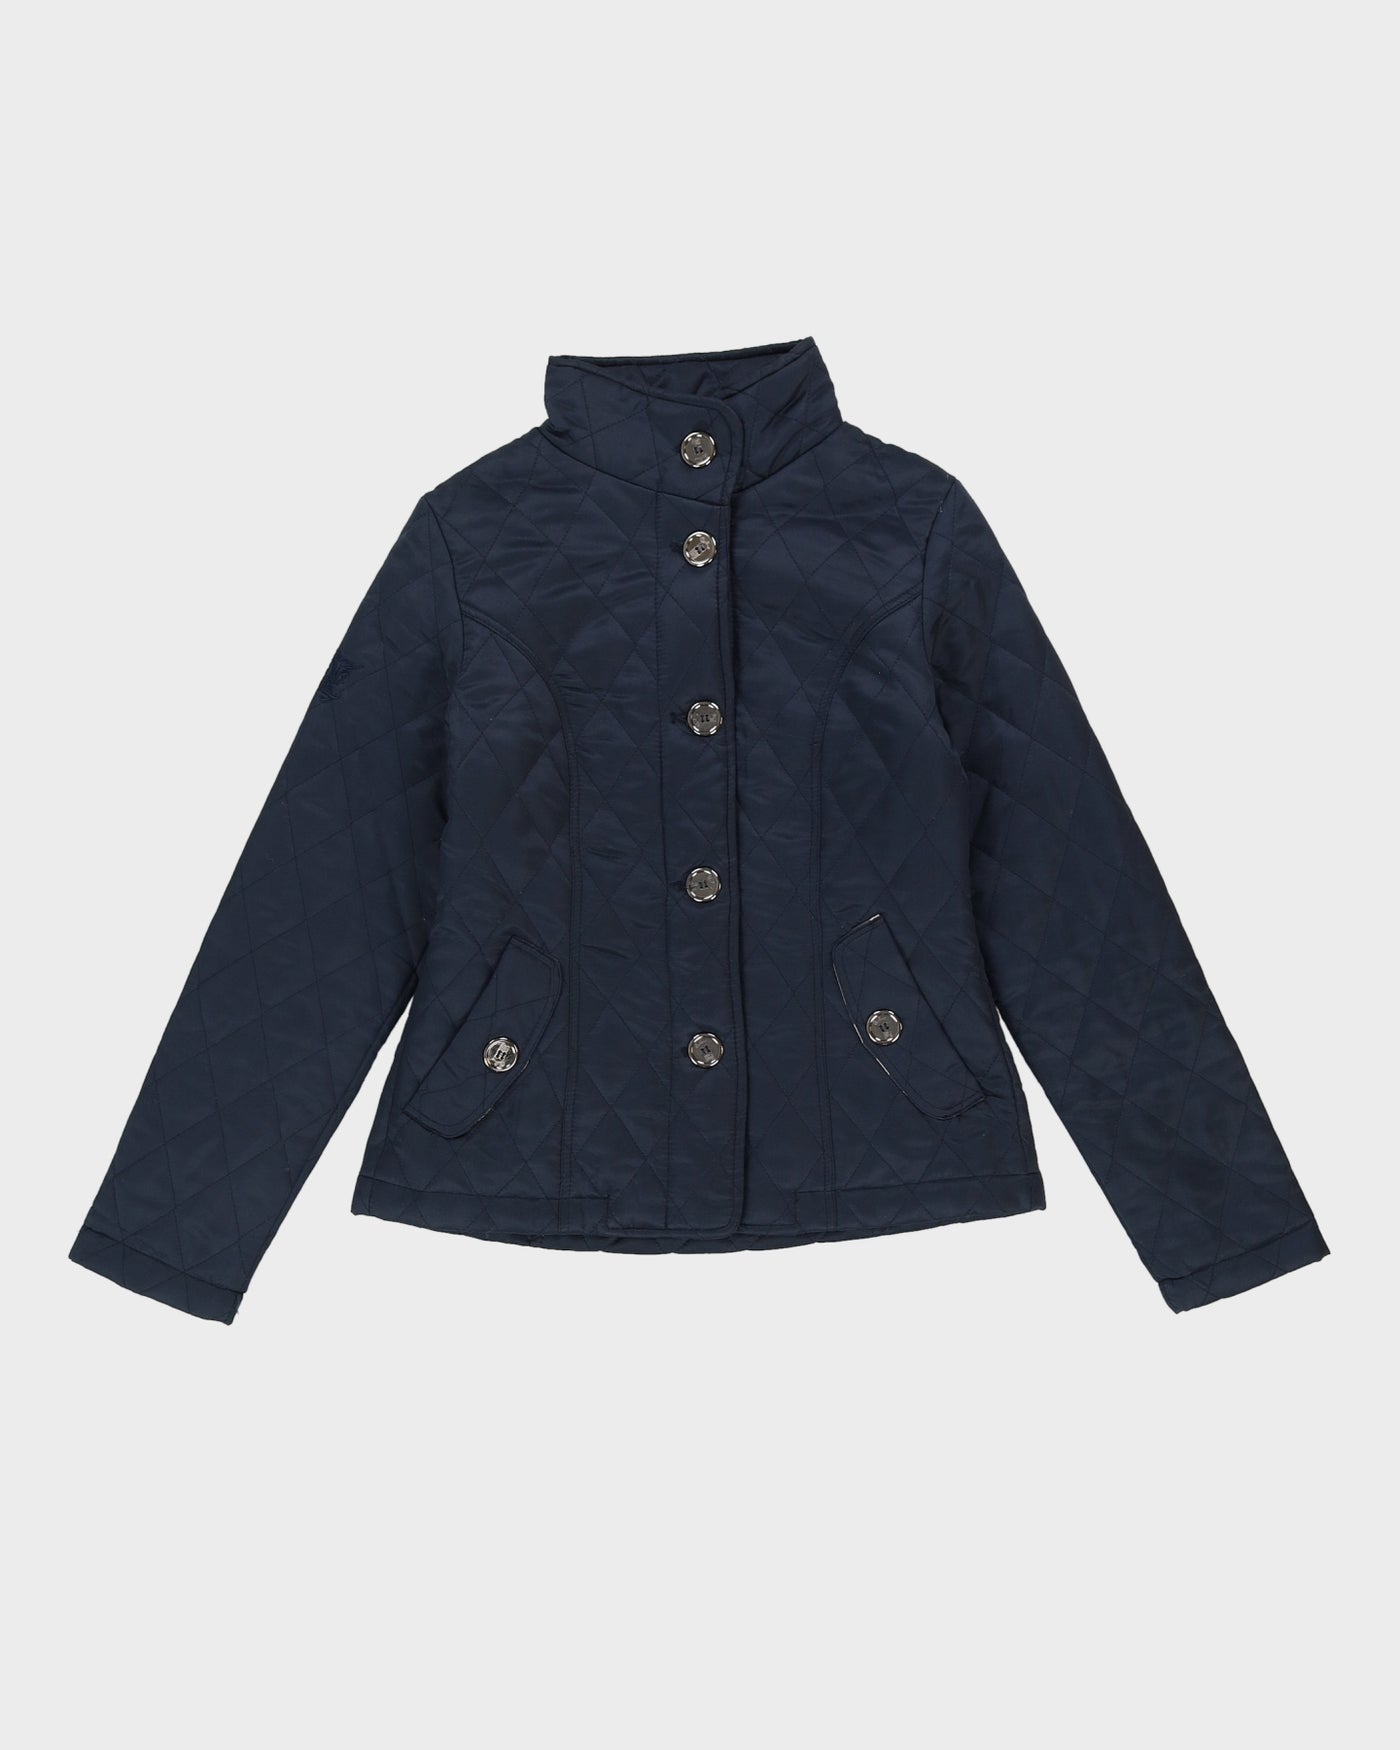 Burberry Navy Blue Quilted Jacket - XXS